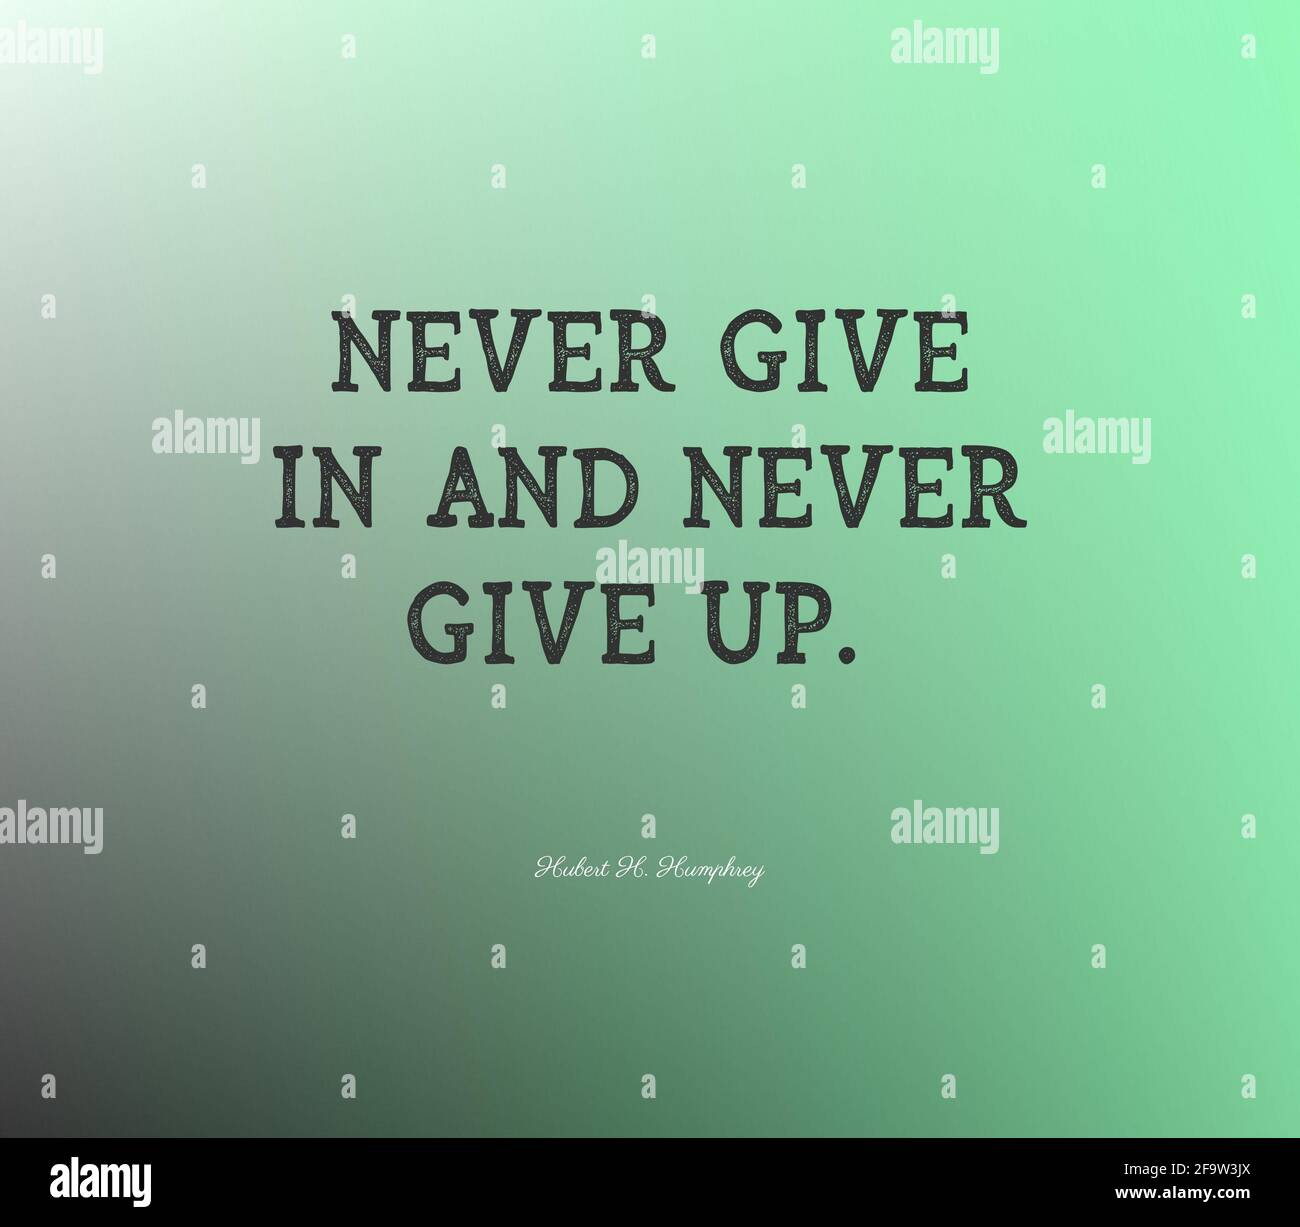 Powerful quote "Never give in and never give up" Stock Photo